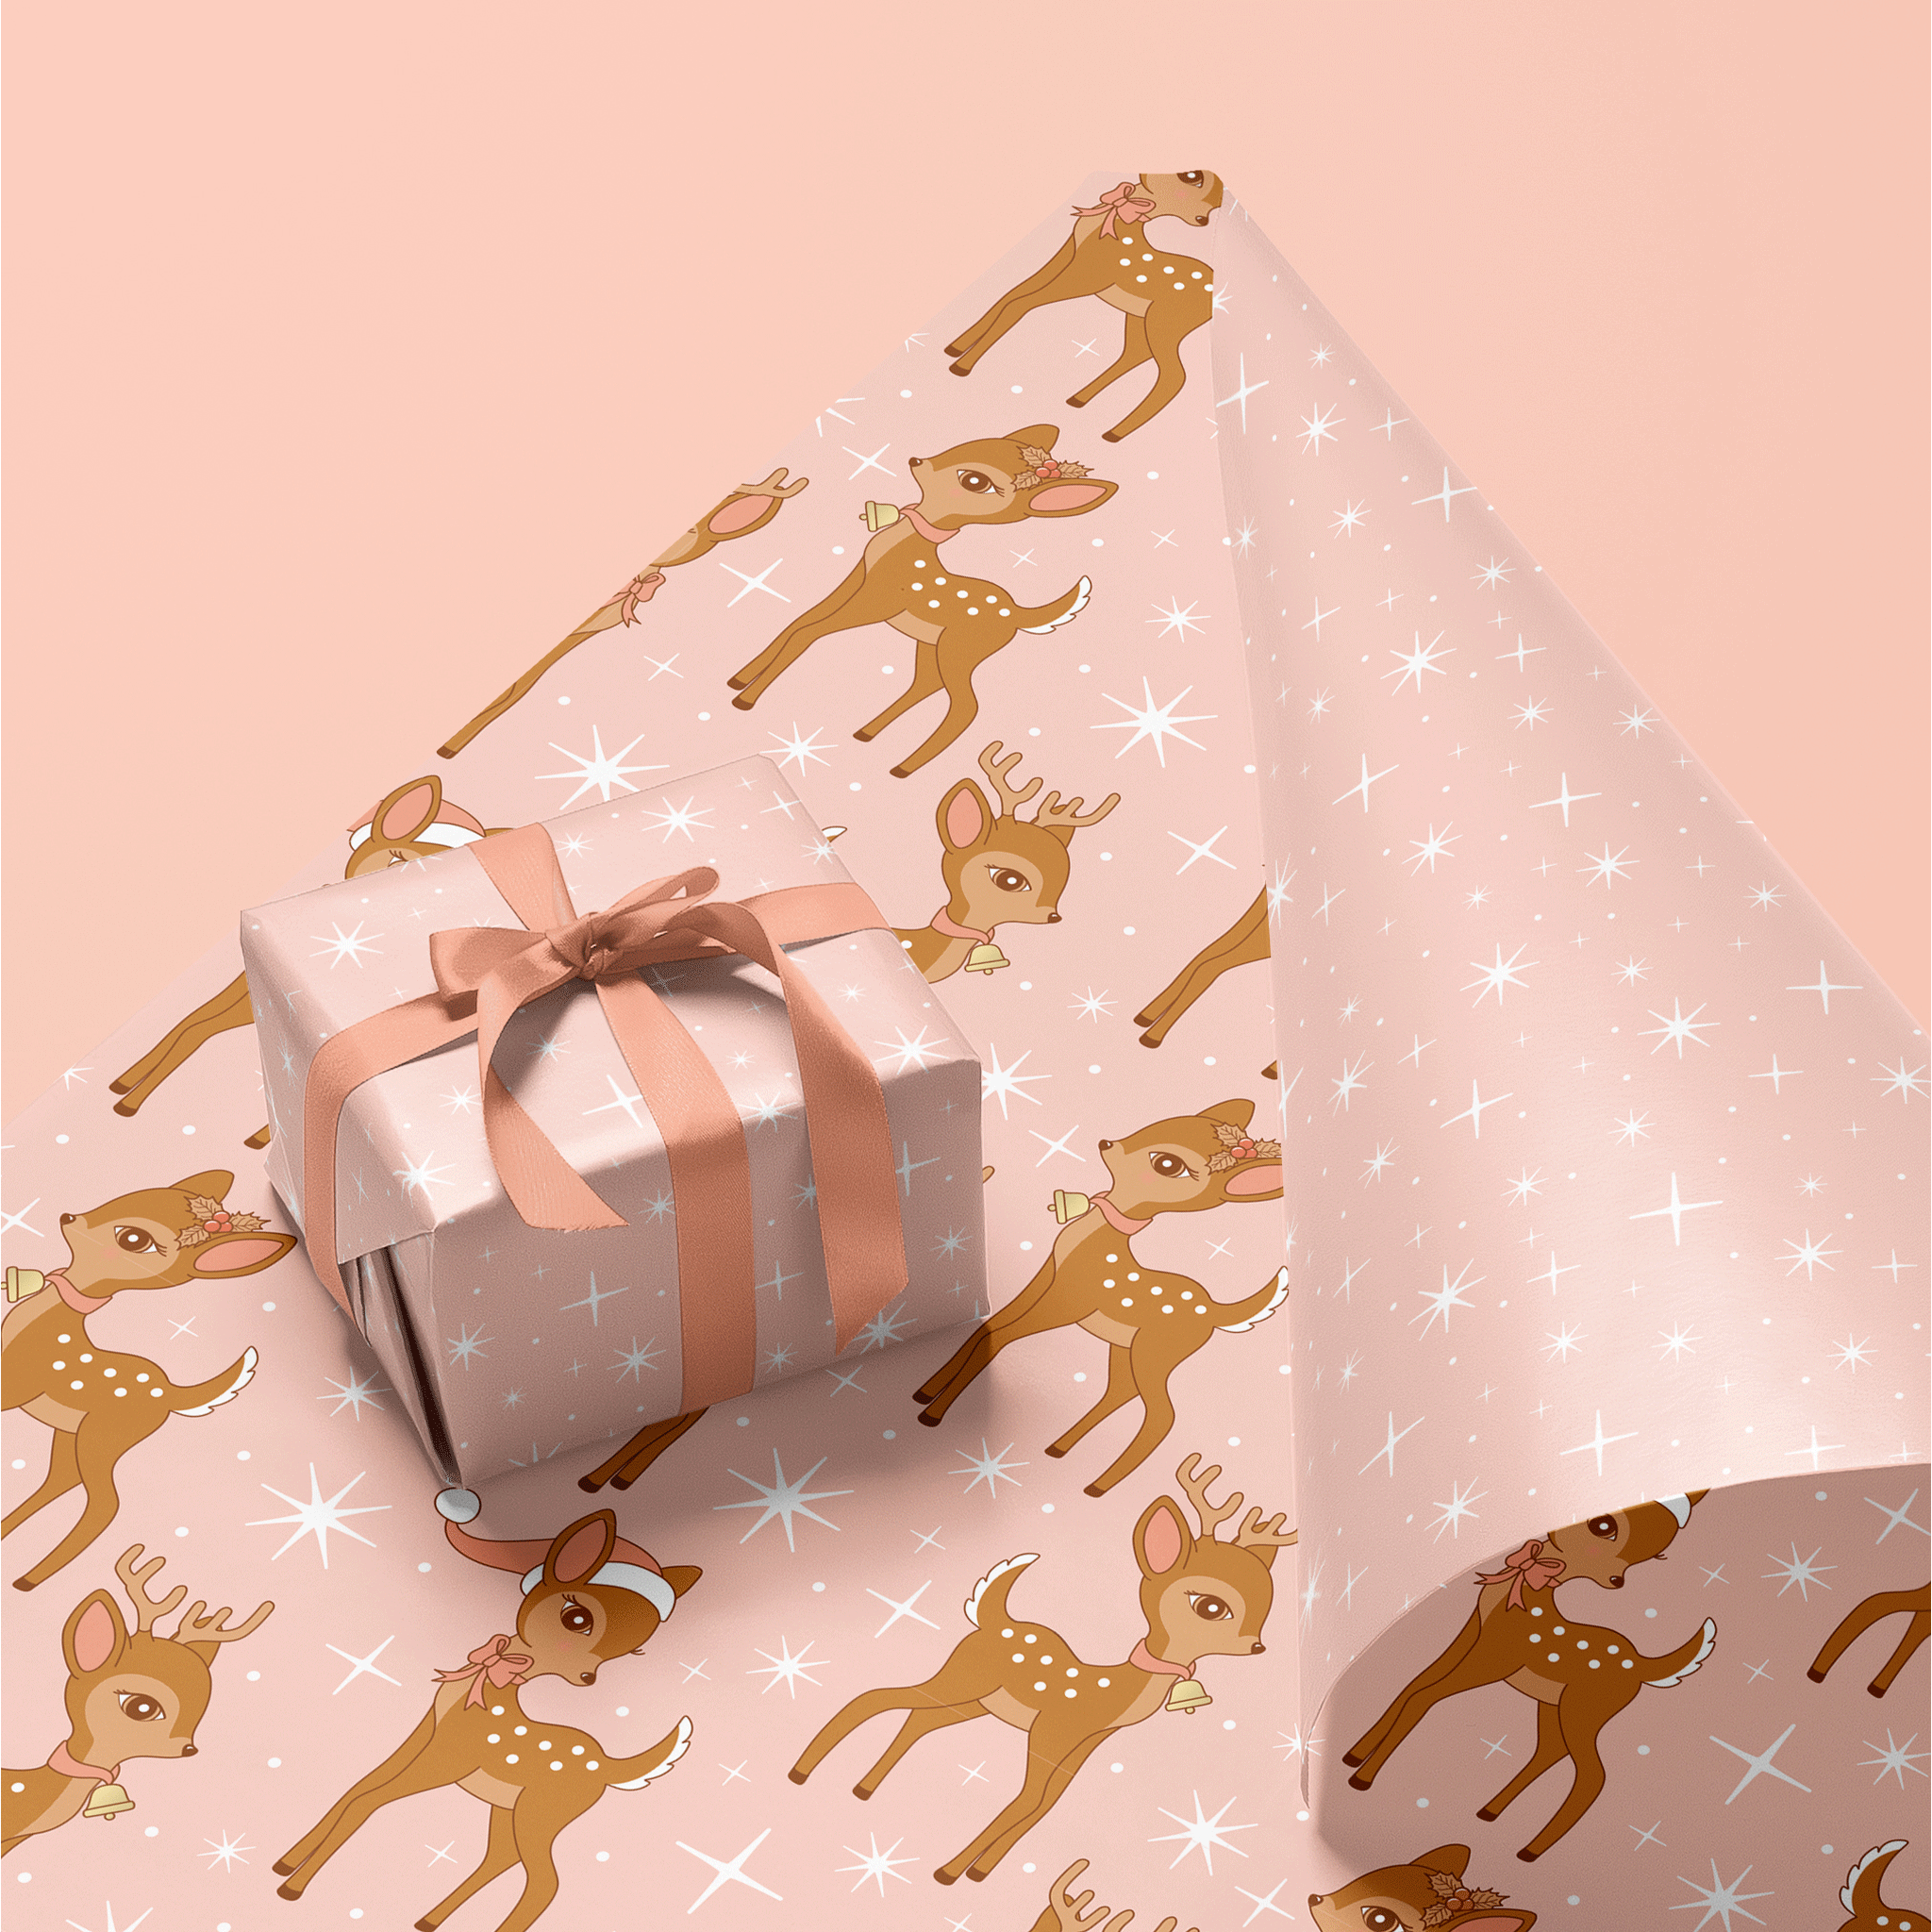 On a peach background is a light pink and retro deer gift wrapping paper detailed with white sparkle accents. 